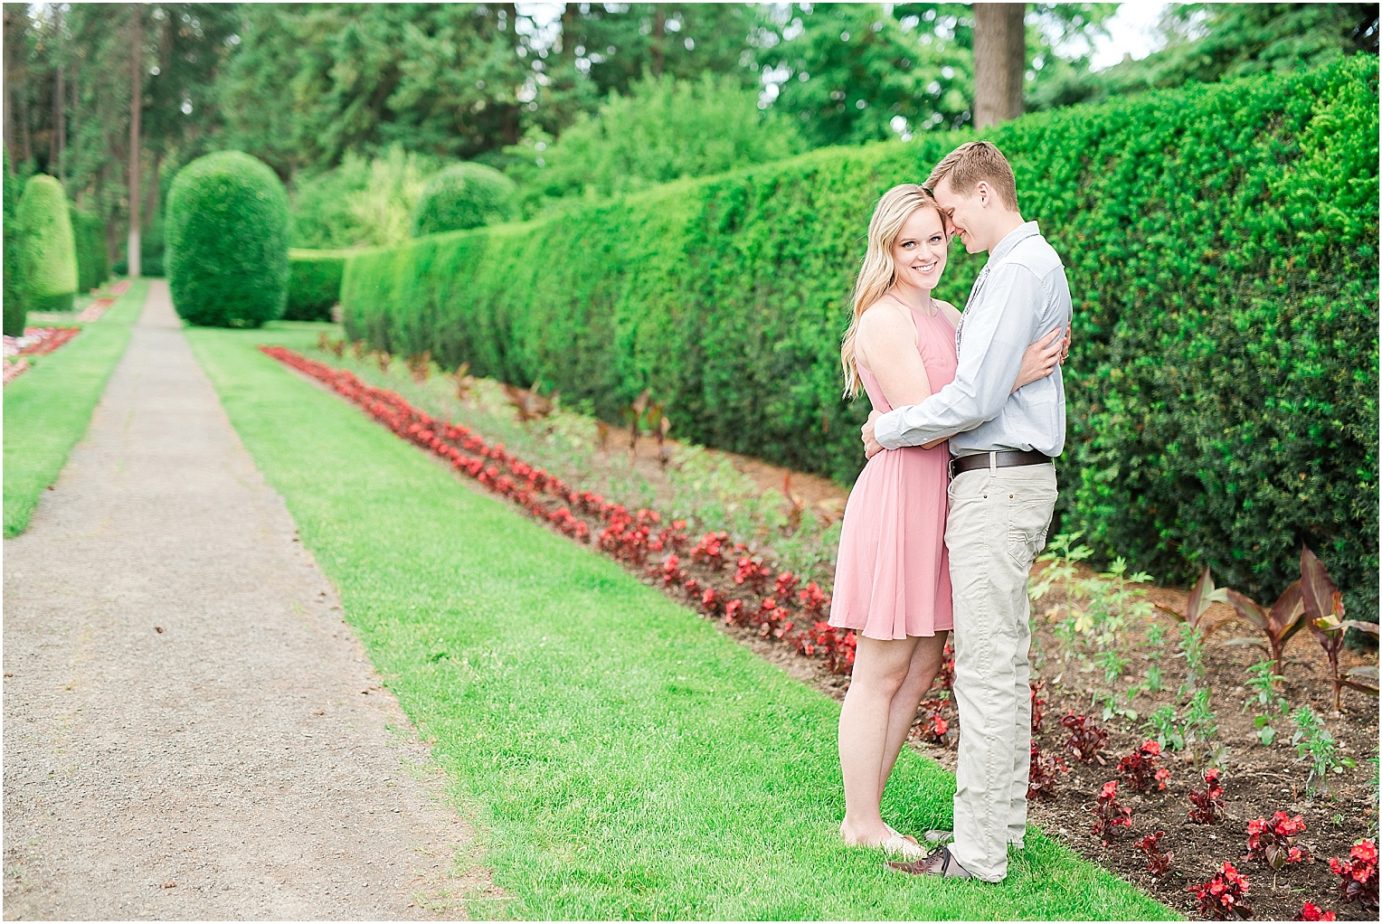 Manito Park Engagement Session Spokane Photographer Bryan and Olivia in Duncan Garden